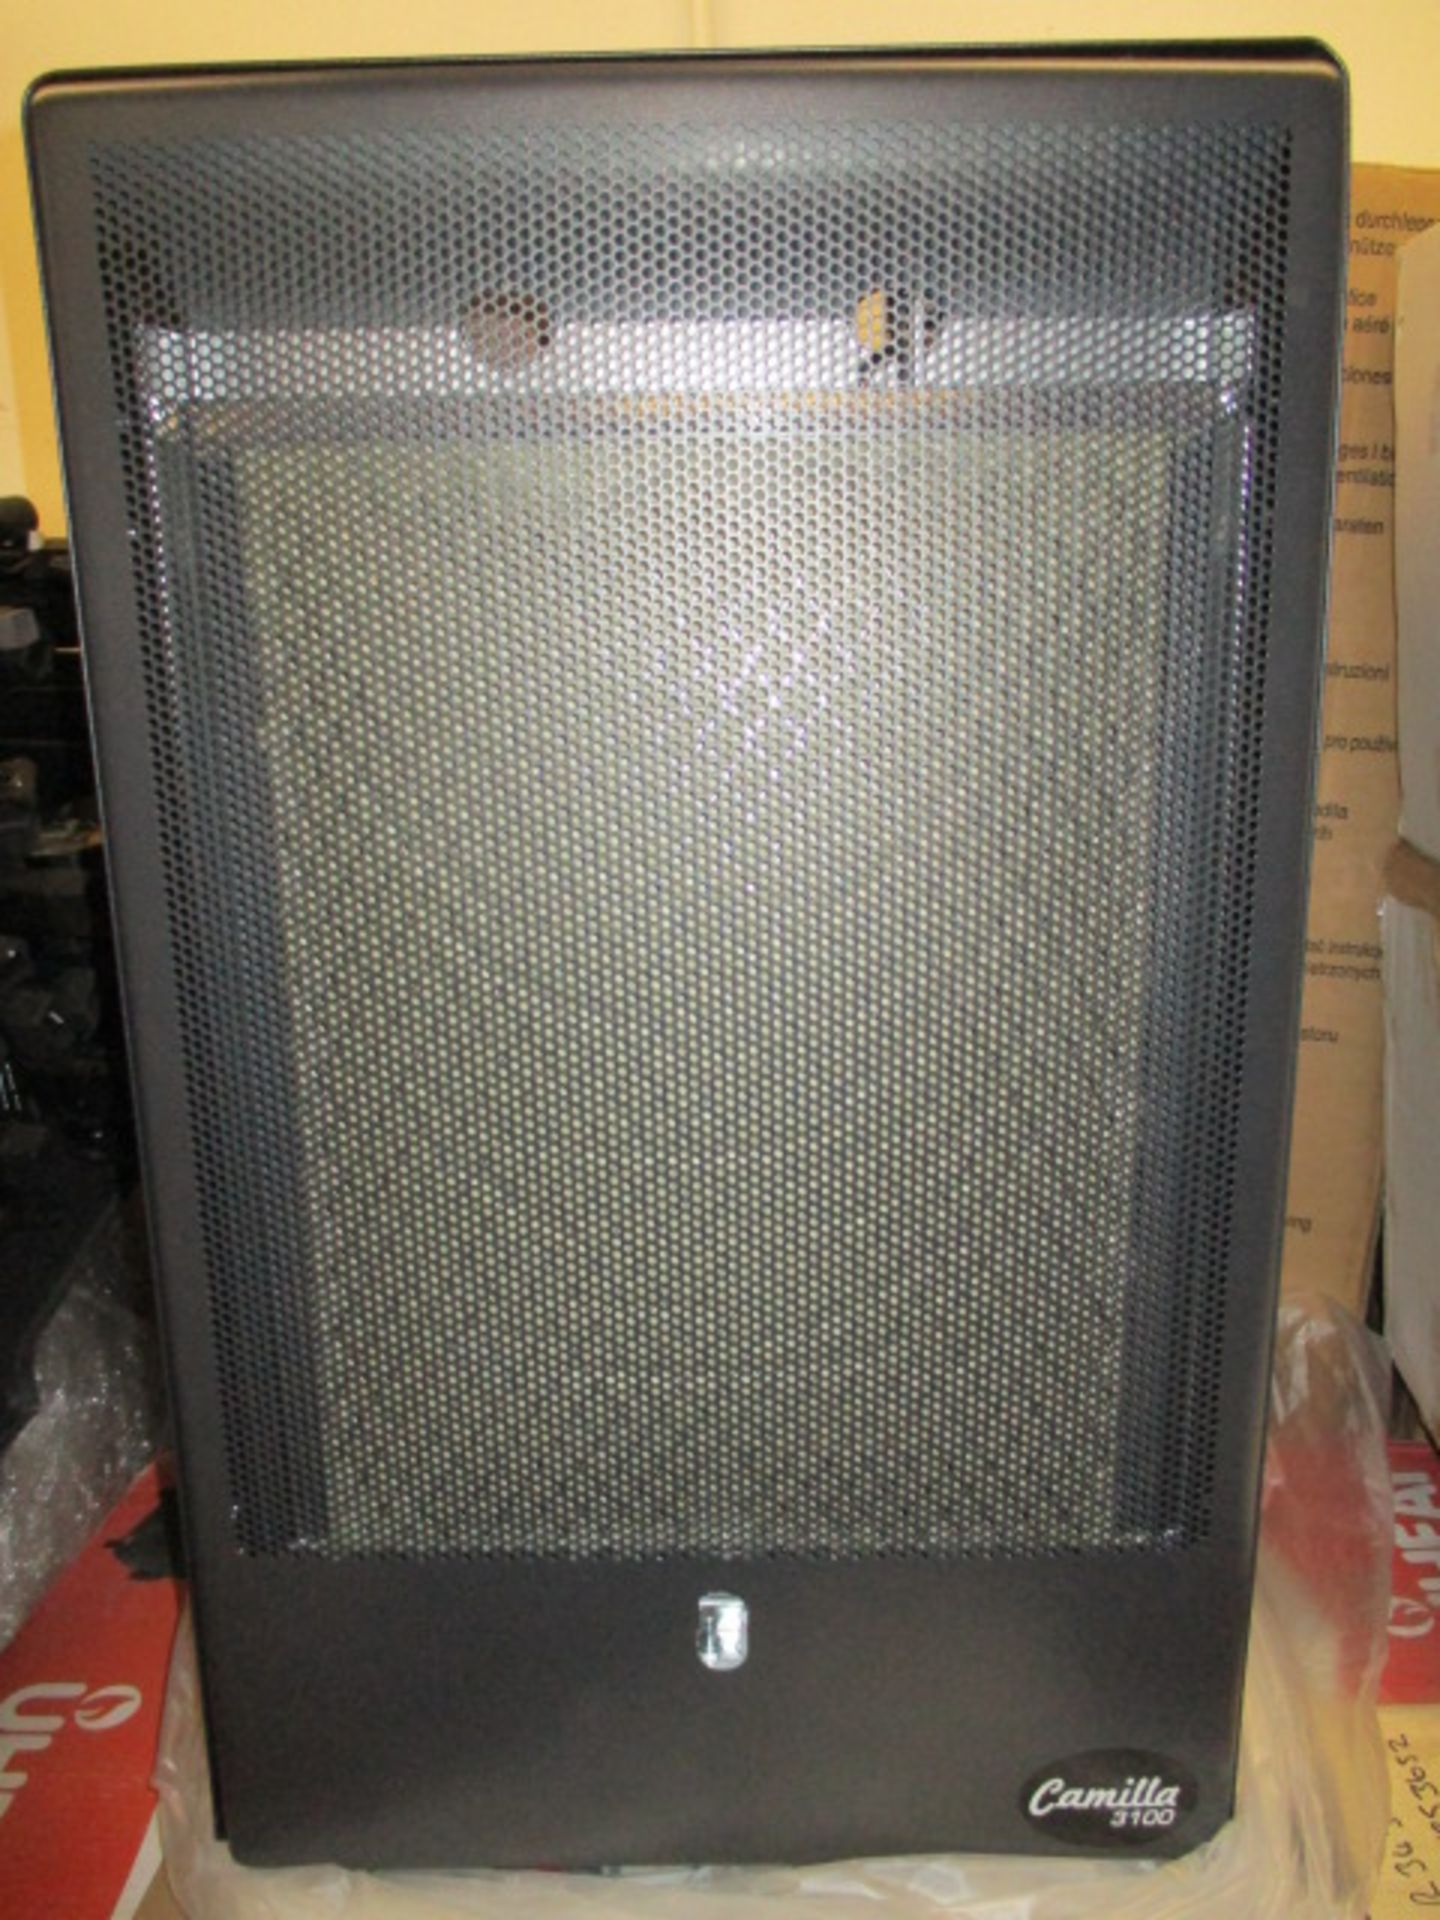 Camilla 3100 Catalytic gas heater brand new in box slight dent on inner base of unit RRP £119.99 - Image 4 of 7